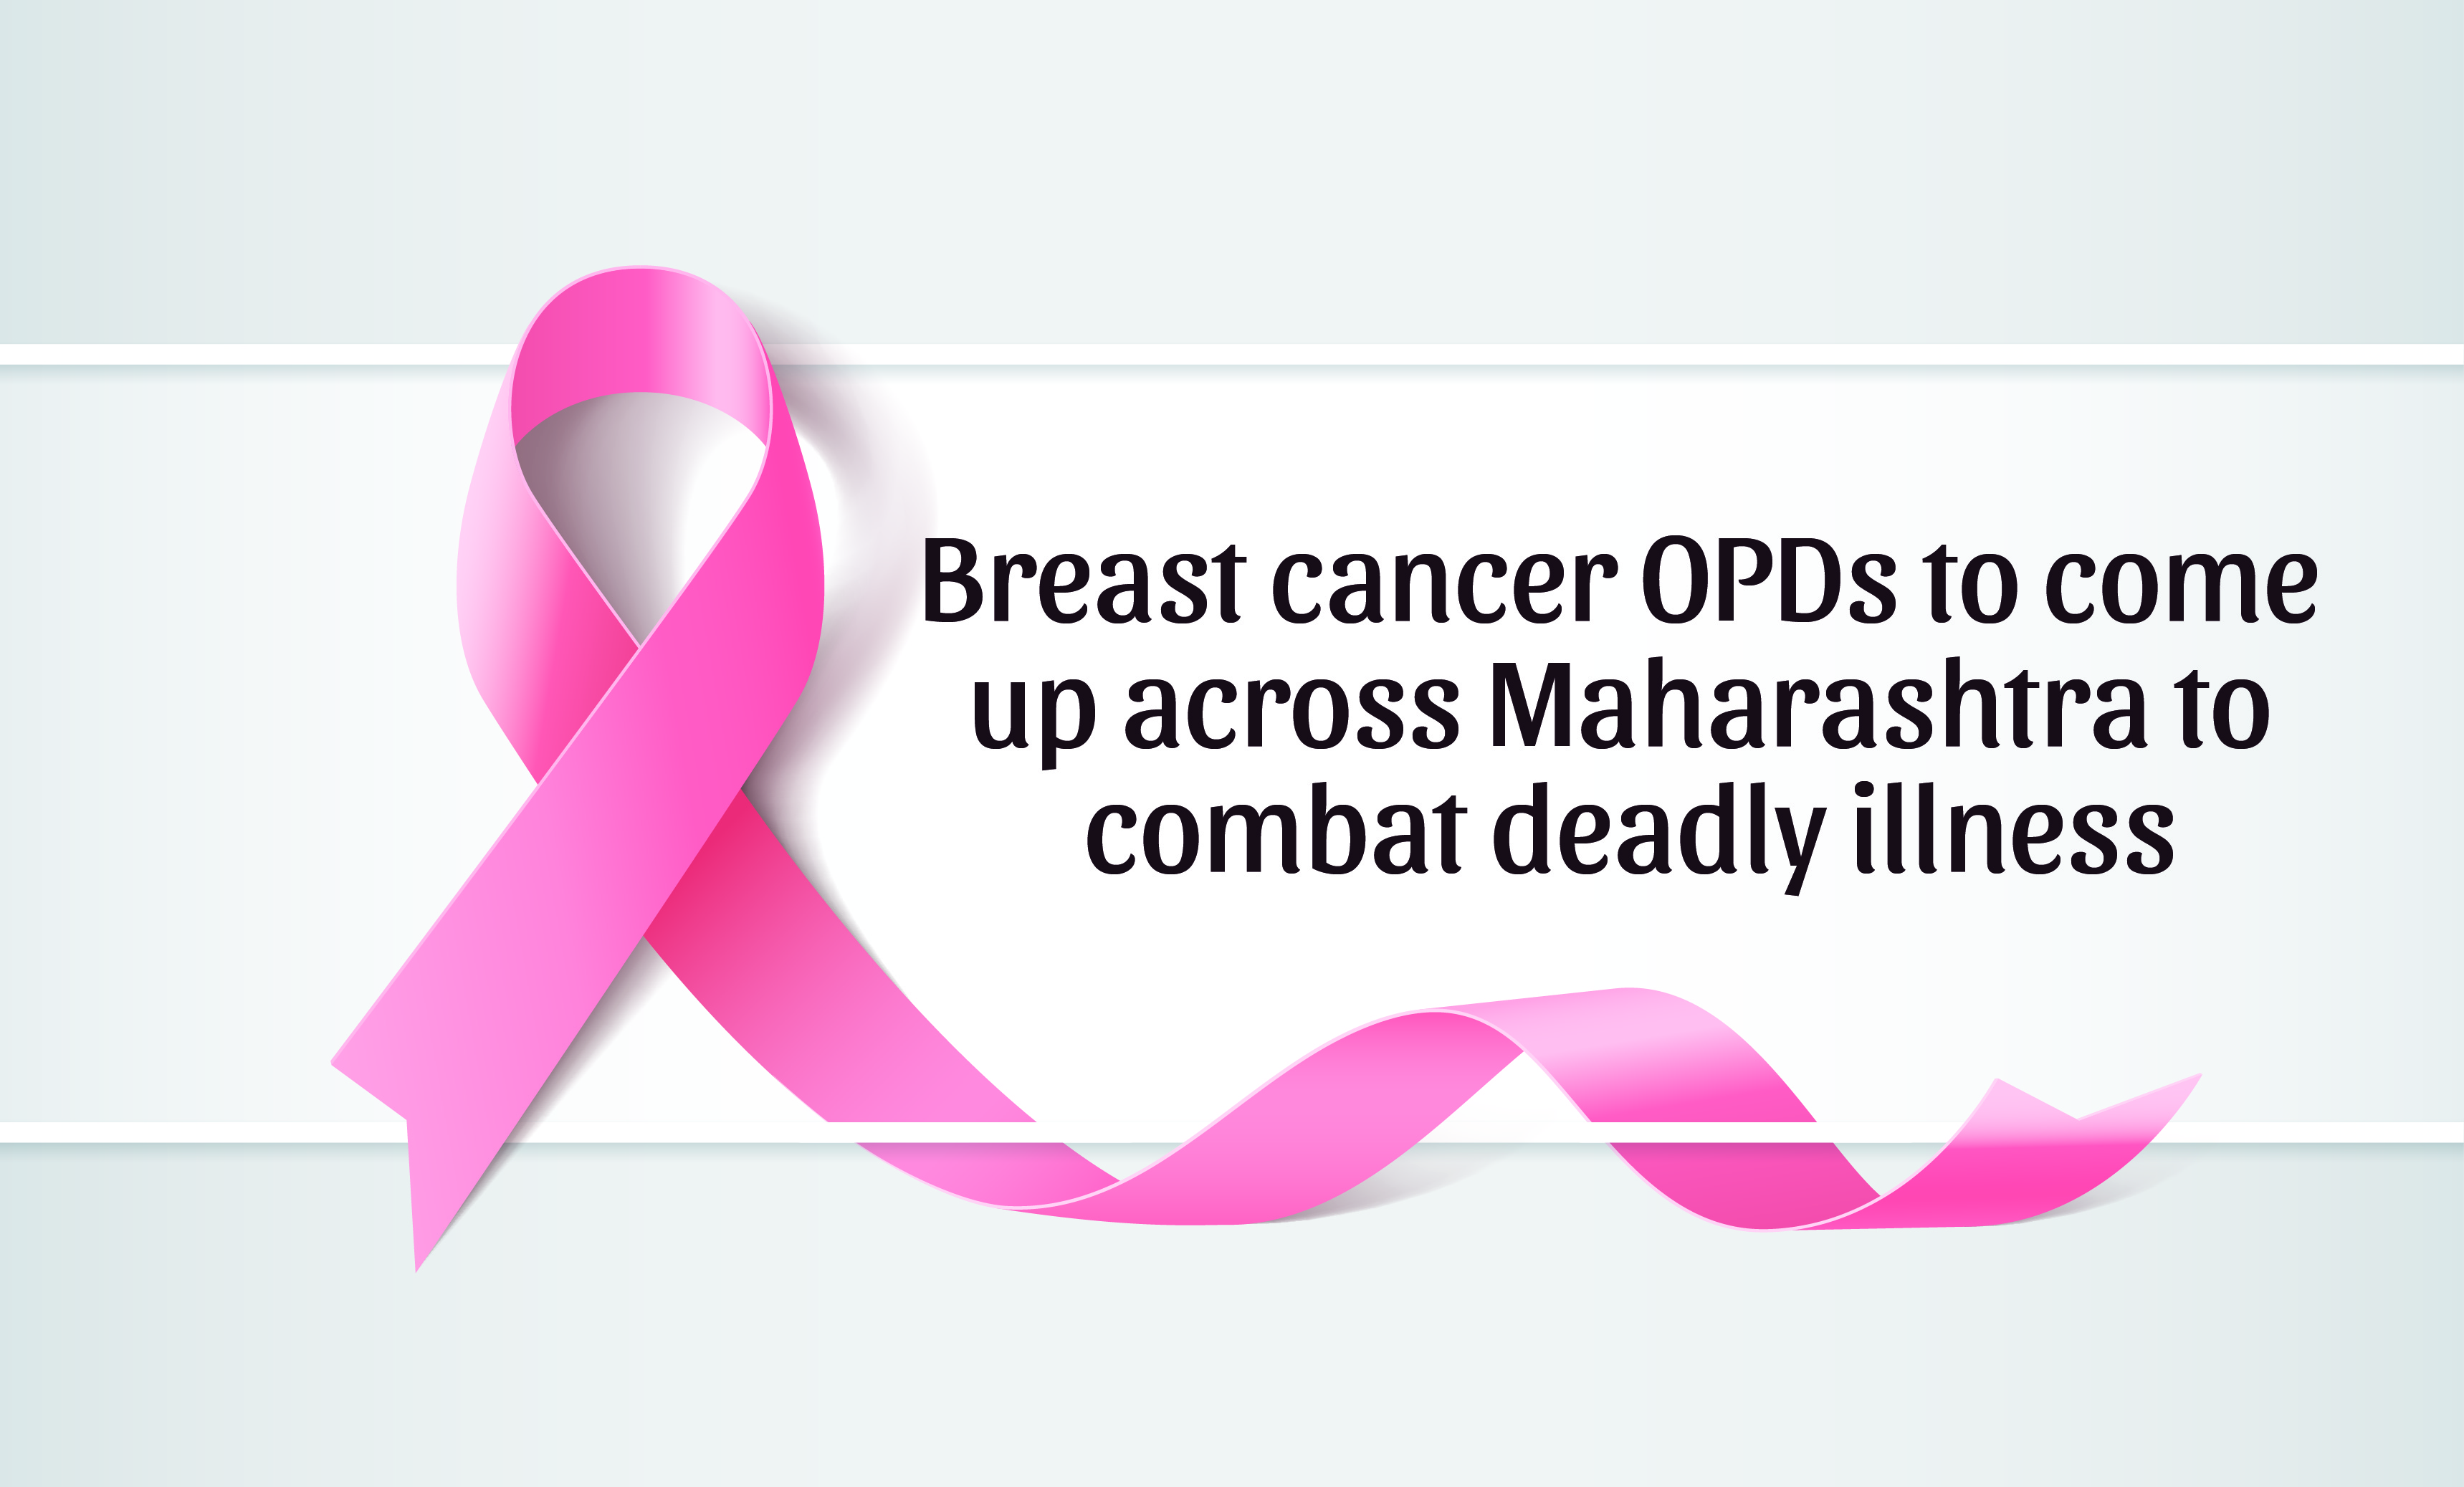 Breast cancer OPDs to come up across Maharashtra to combat deadly illness